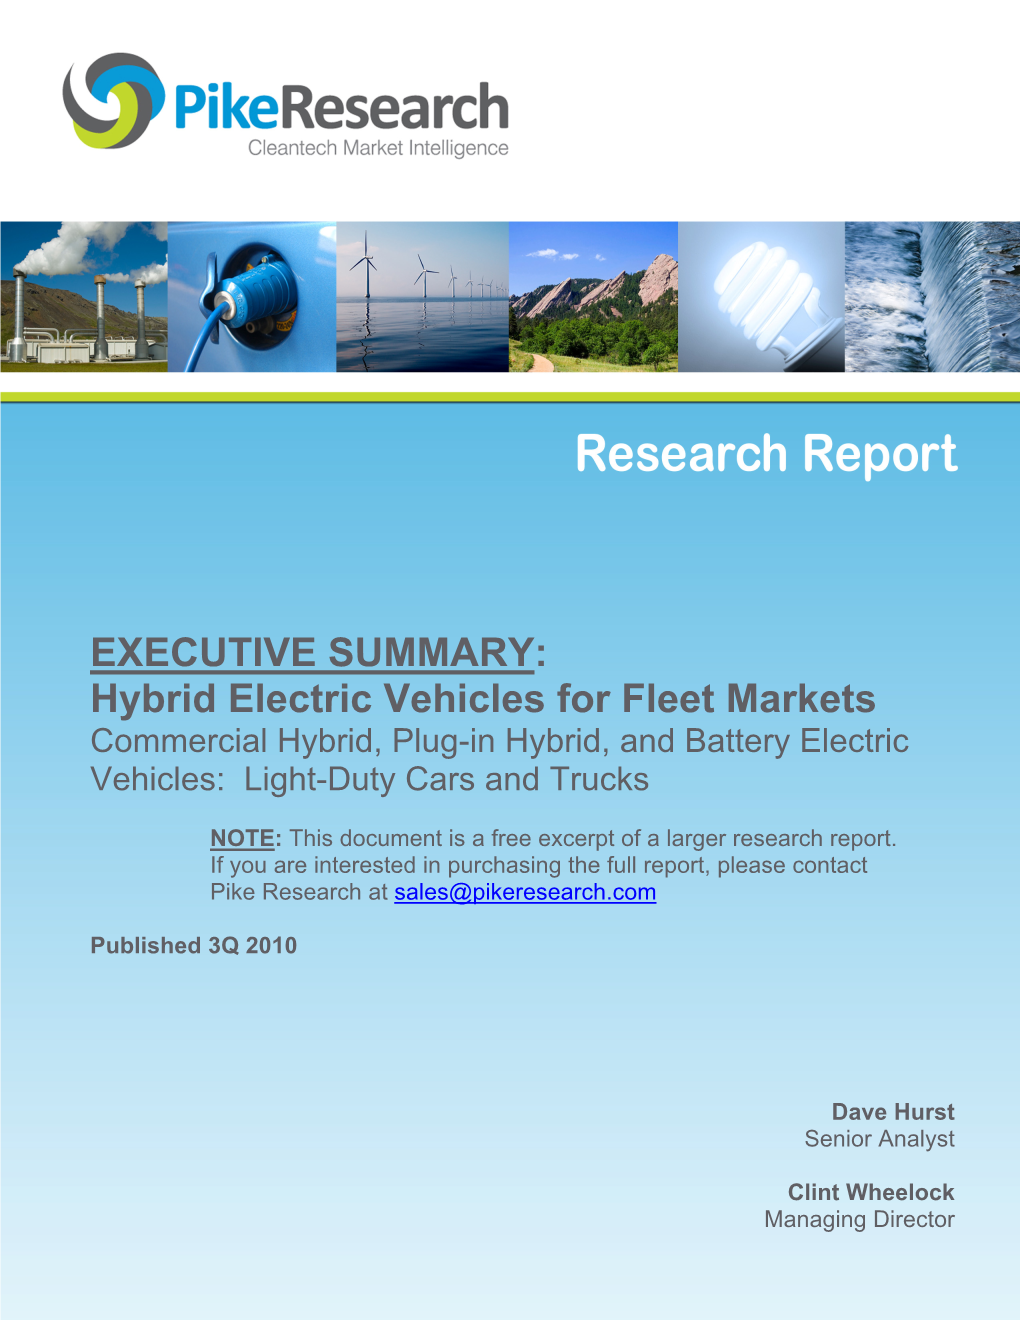 EXECUTIVE SUMMARY: Hybrid Electric Vehicles for Fleet Markets Commercial Hybrid, Plug-In Hybrid, and Battery Electric Vehicles: Light-Duty Cars and Trucks